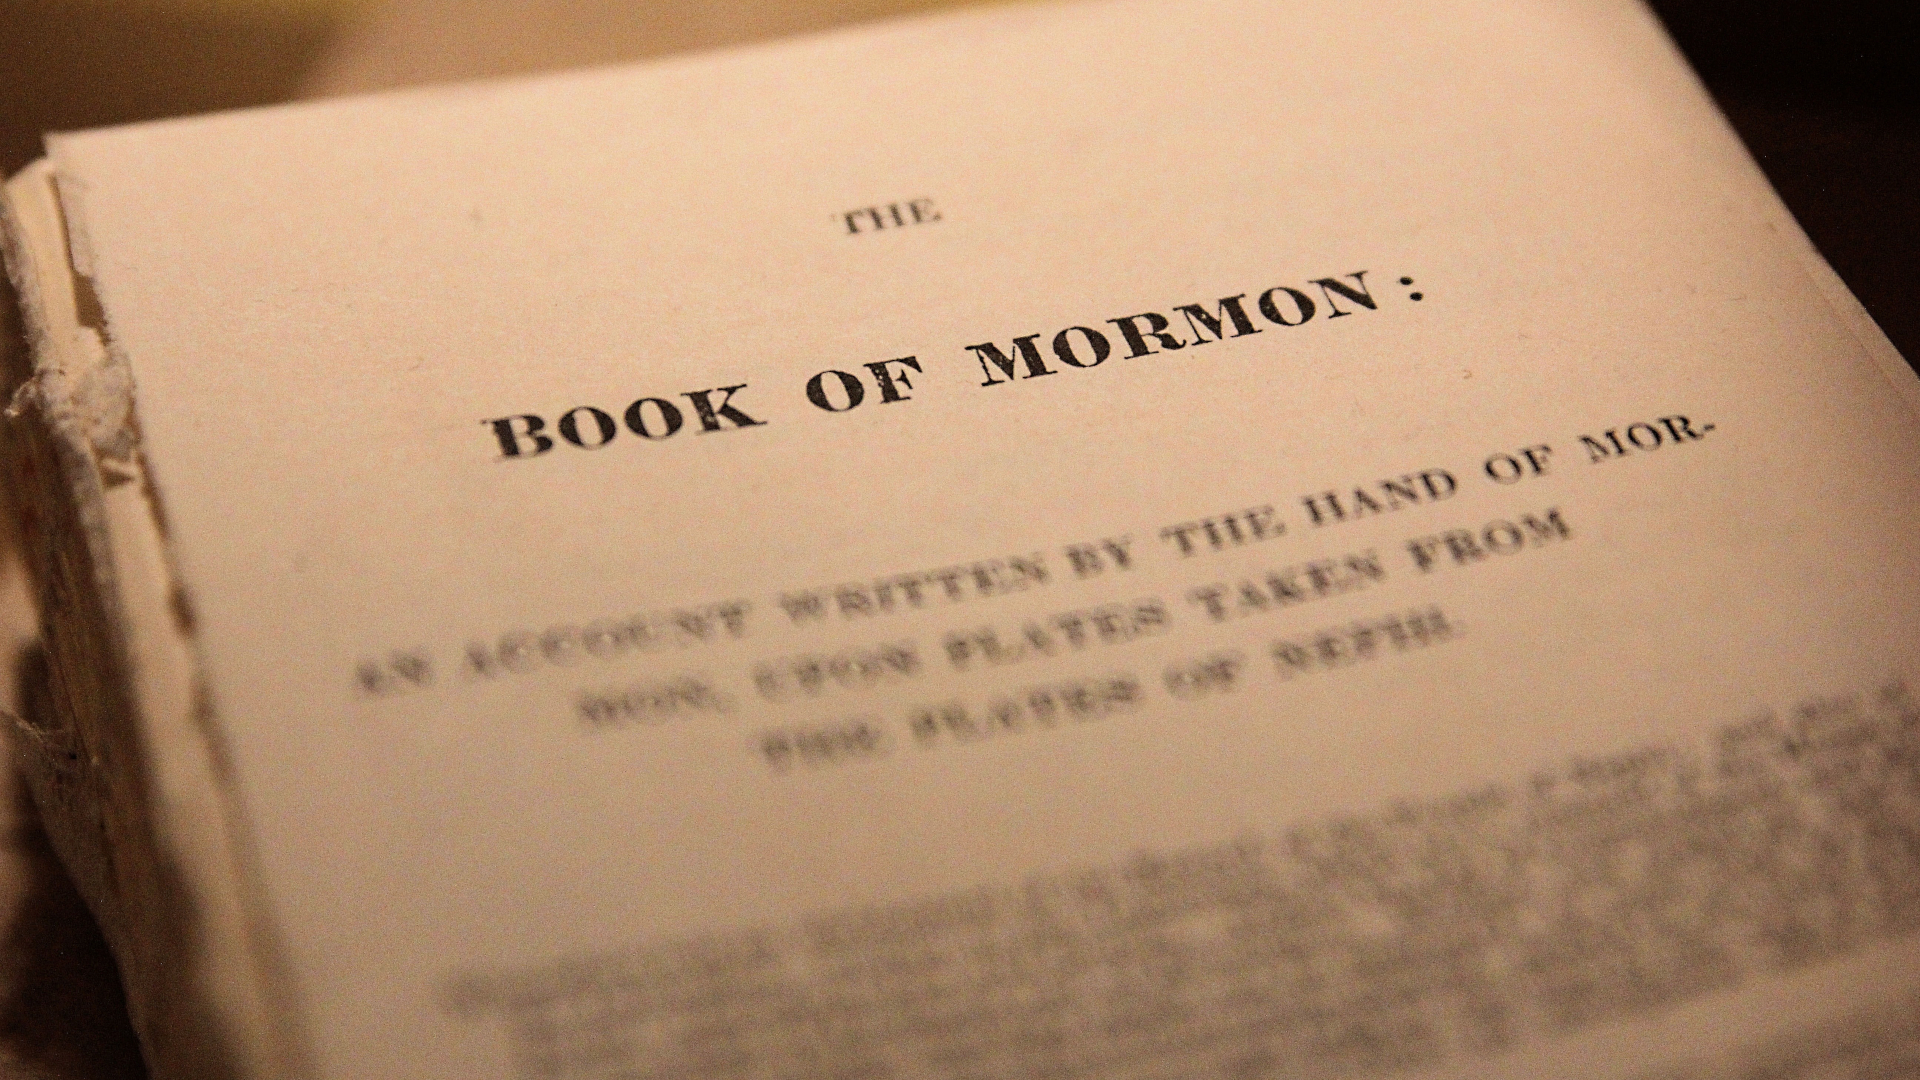 The title page of the Book of Mormon as it appeared in its first printing. Image courtesy the Church of Jesus Christ of Latter-day Saints.